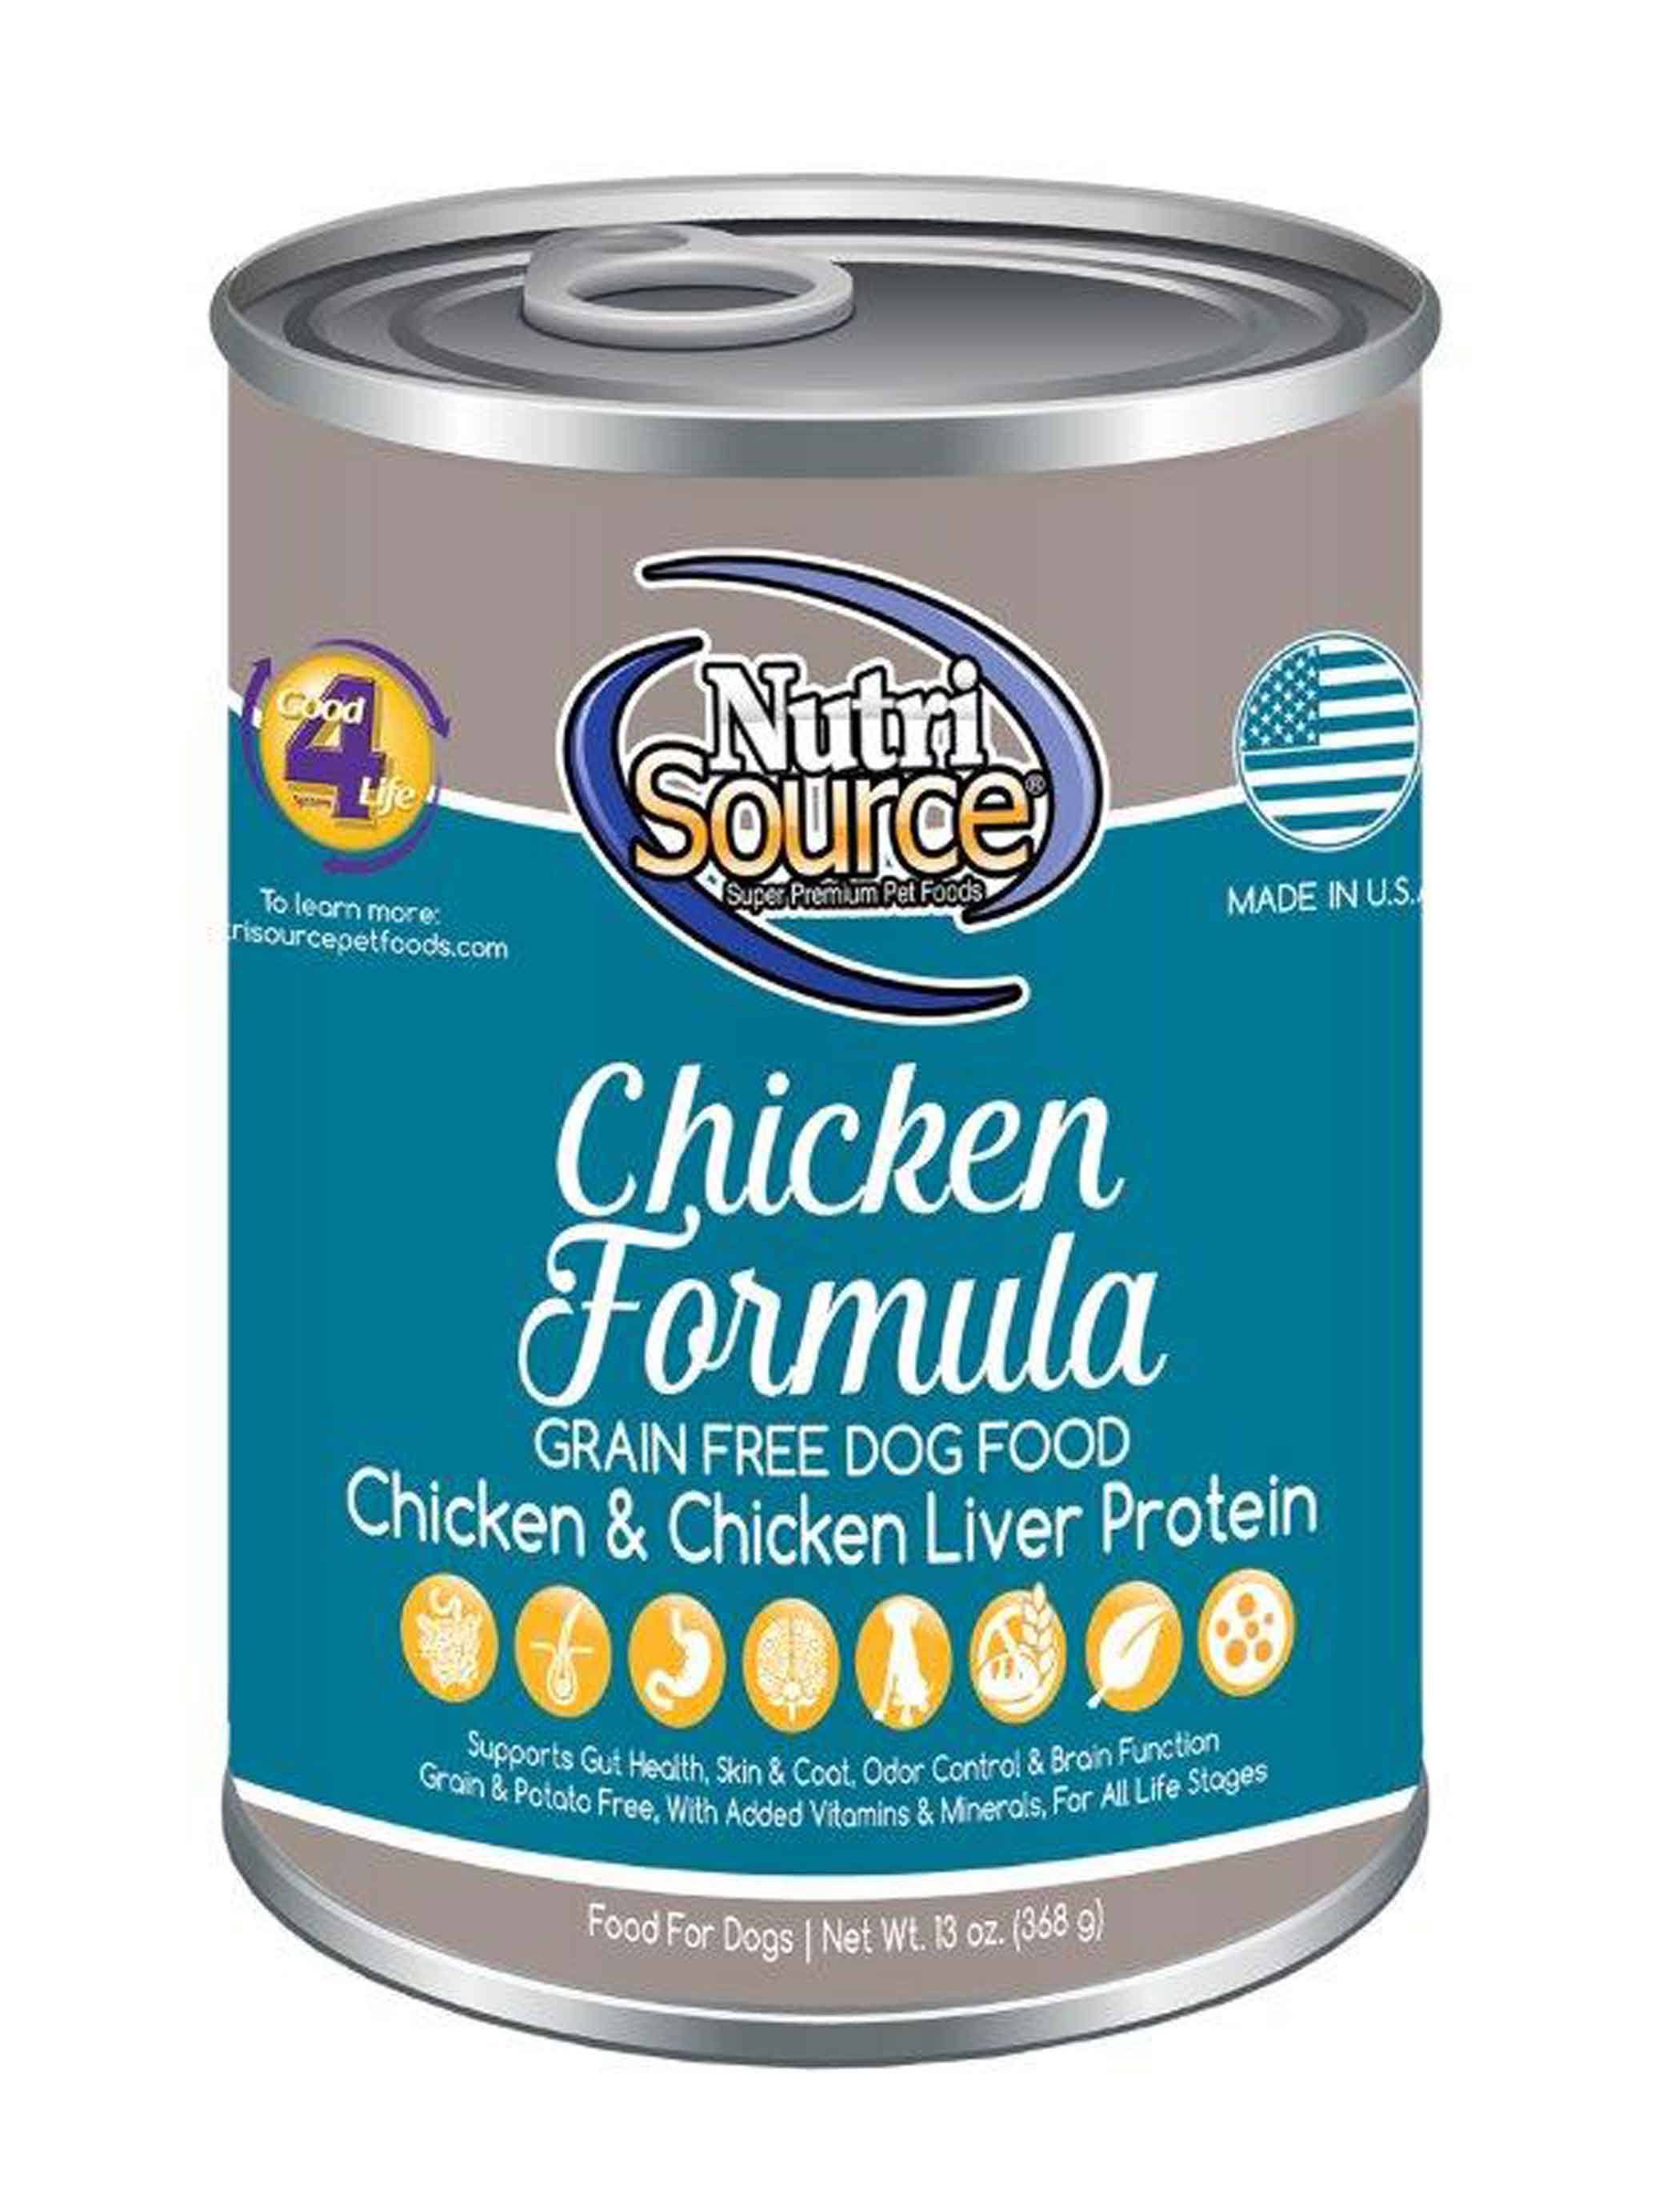 Nutri Source Grain Free Canned Dog Food - Chicken